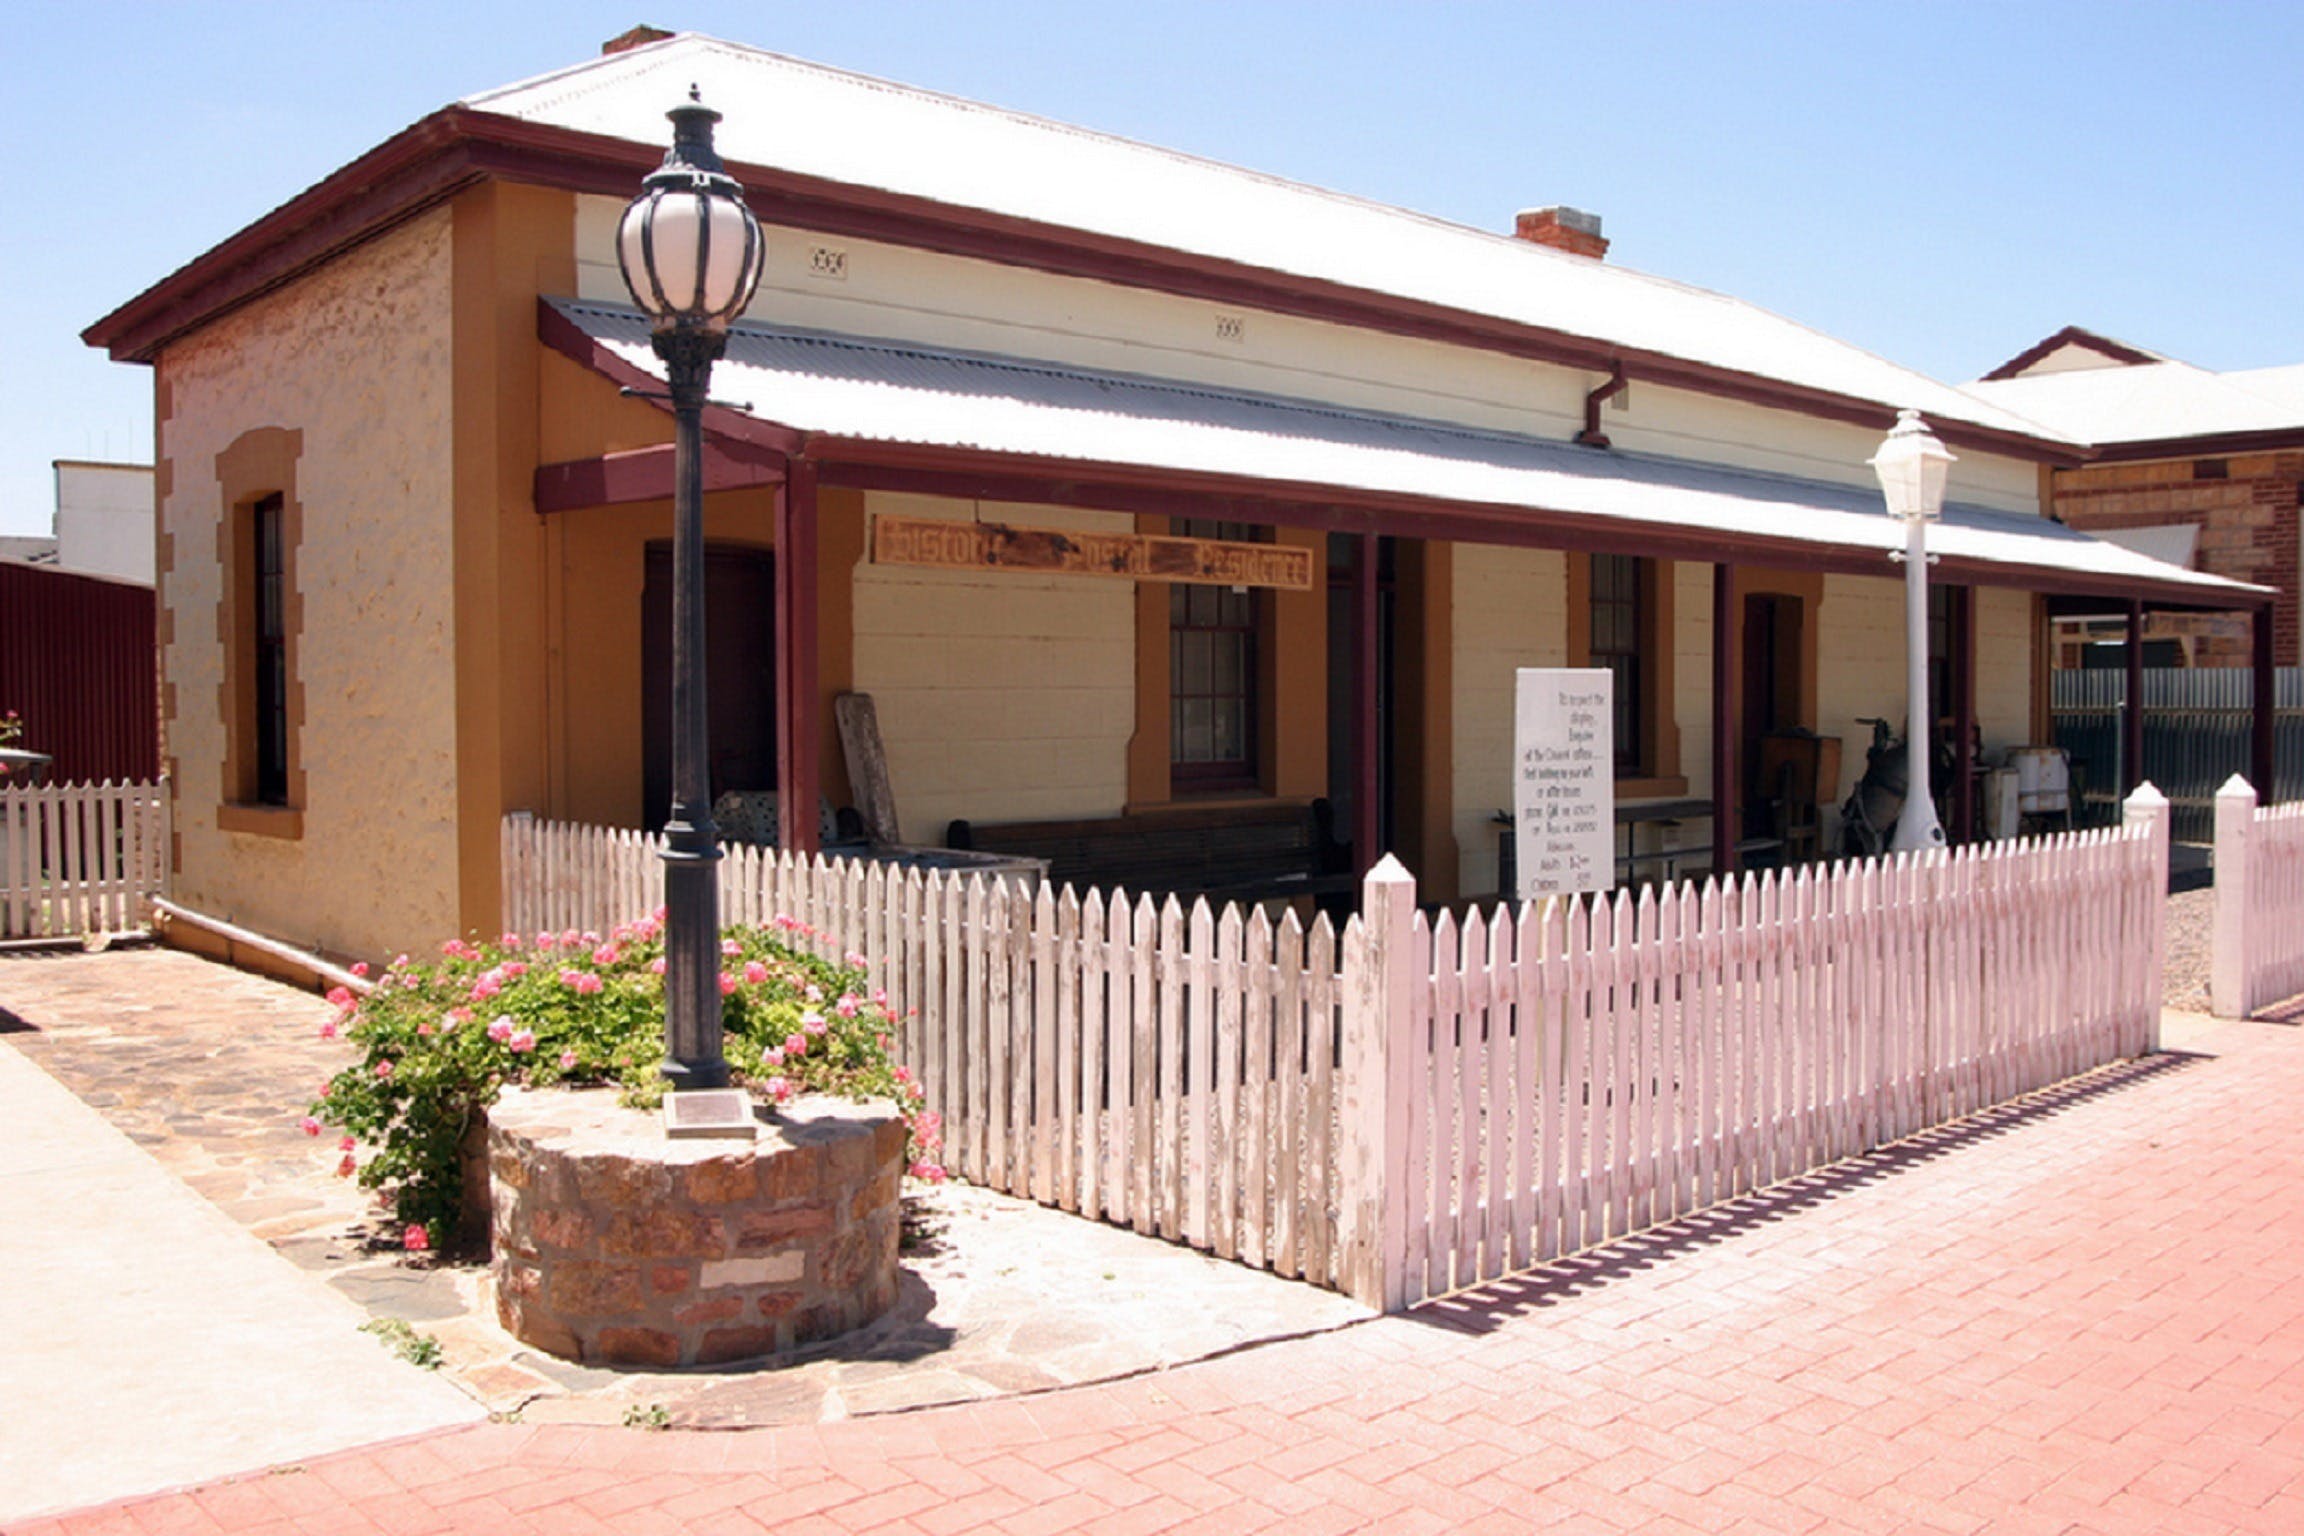 Franklin Harbour Historical Museum - Yamba Accommodation